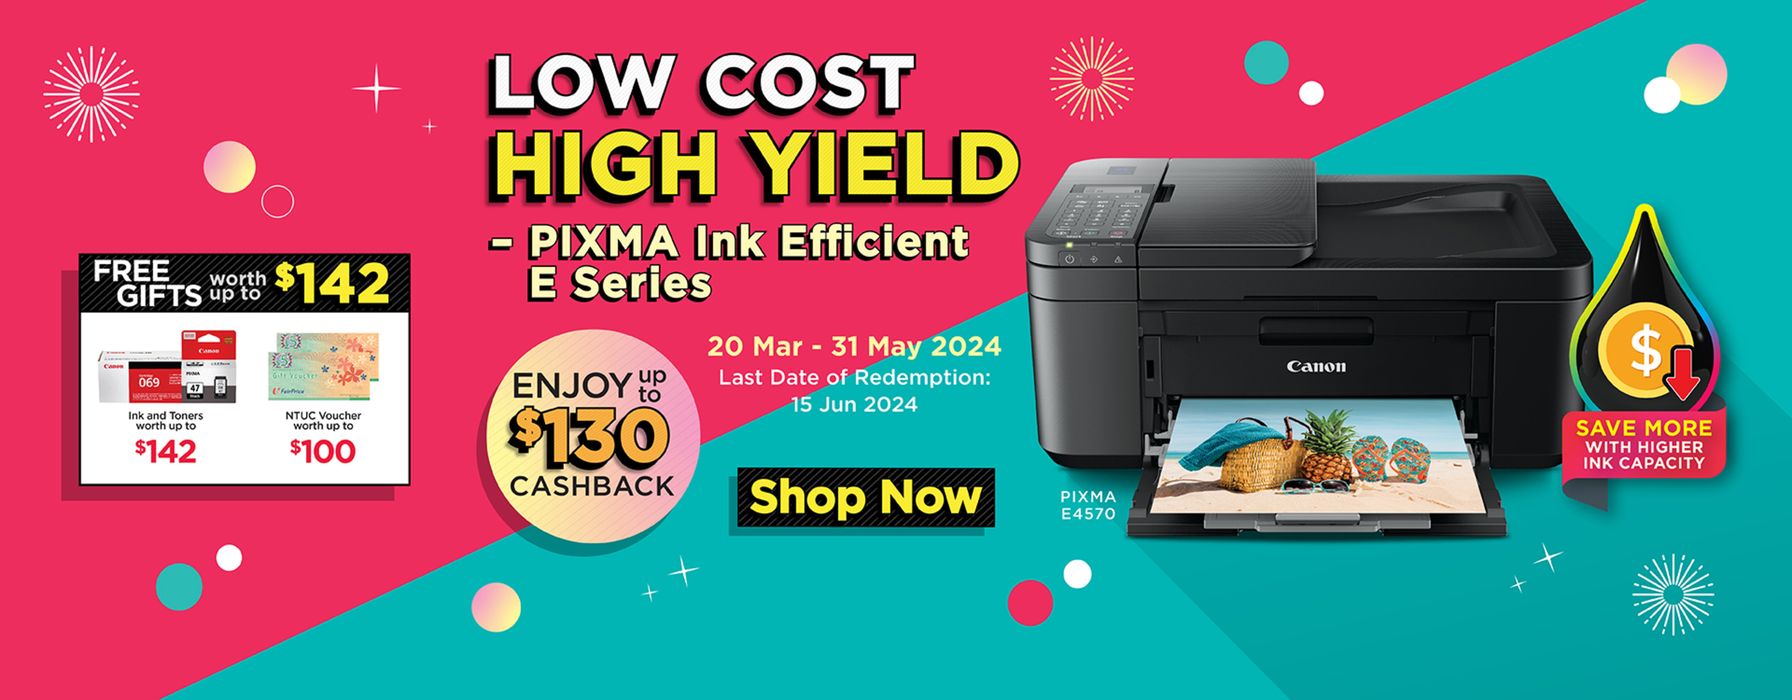 Canon catalogue in Singapore | Low cost - high yield | 17/04/2024 - 31/05/2024